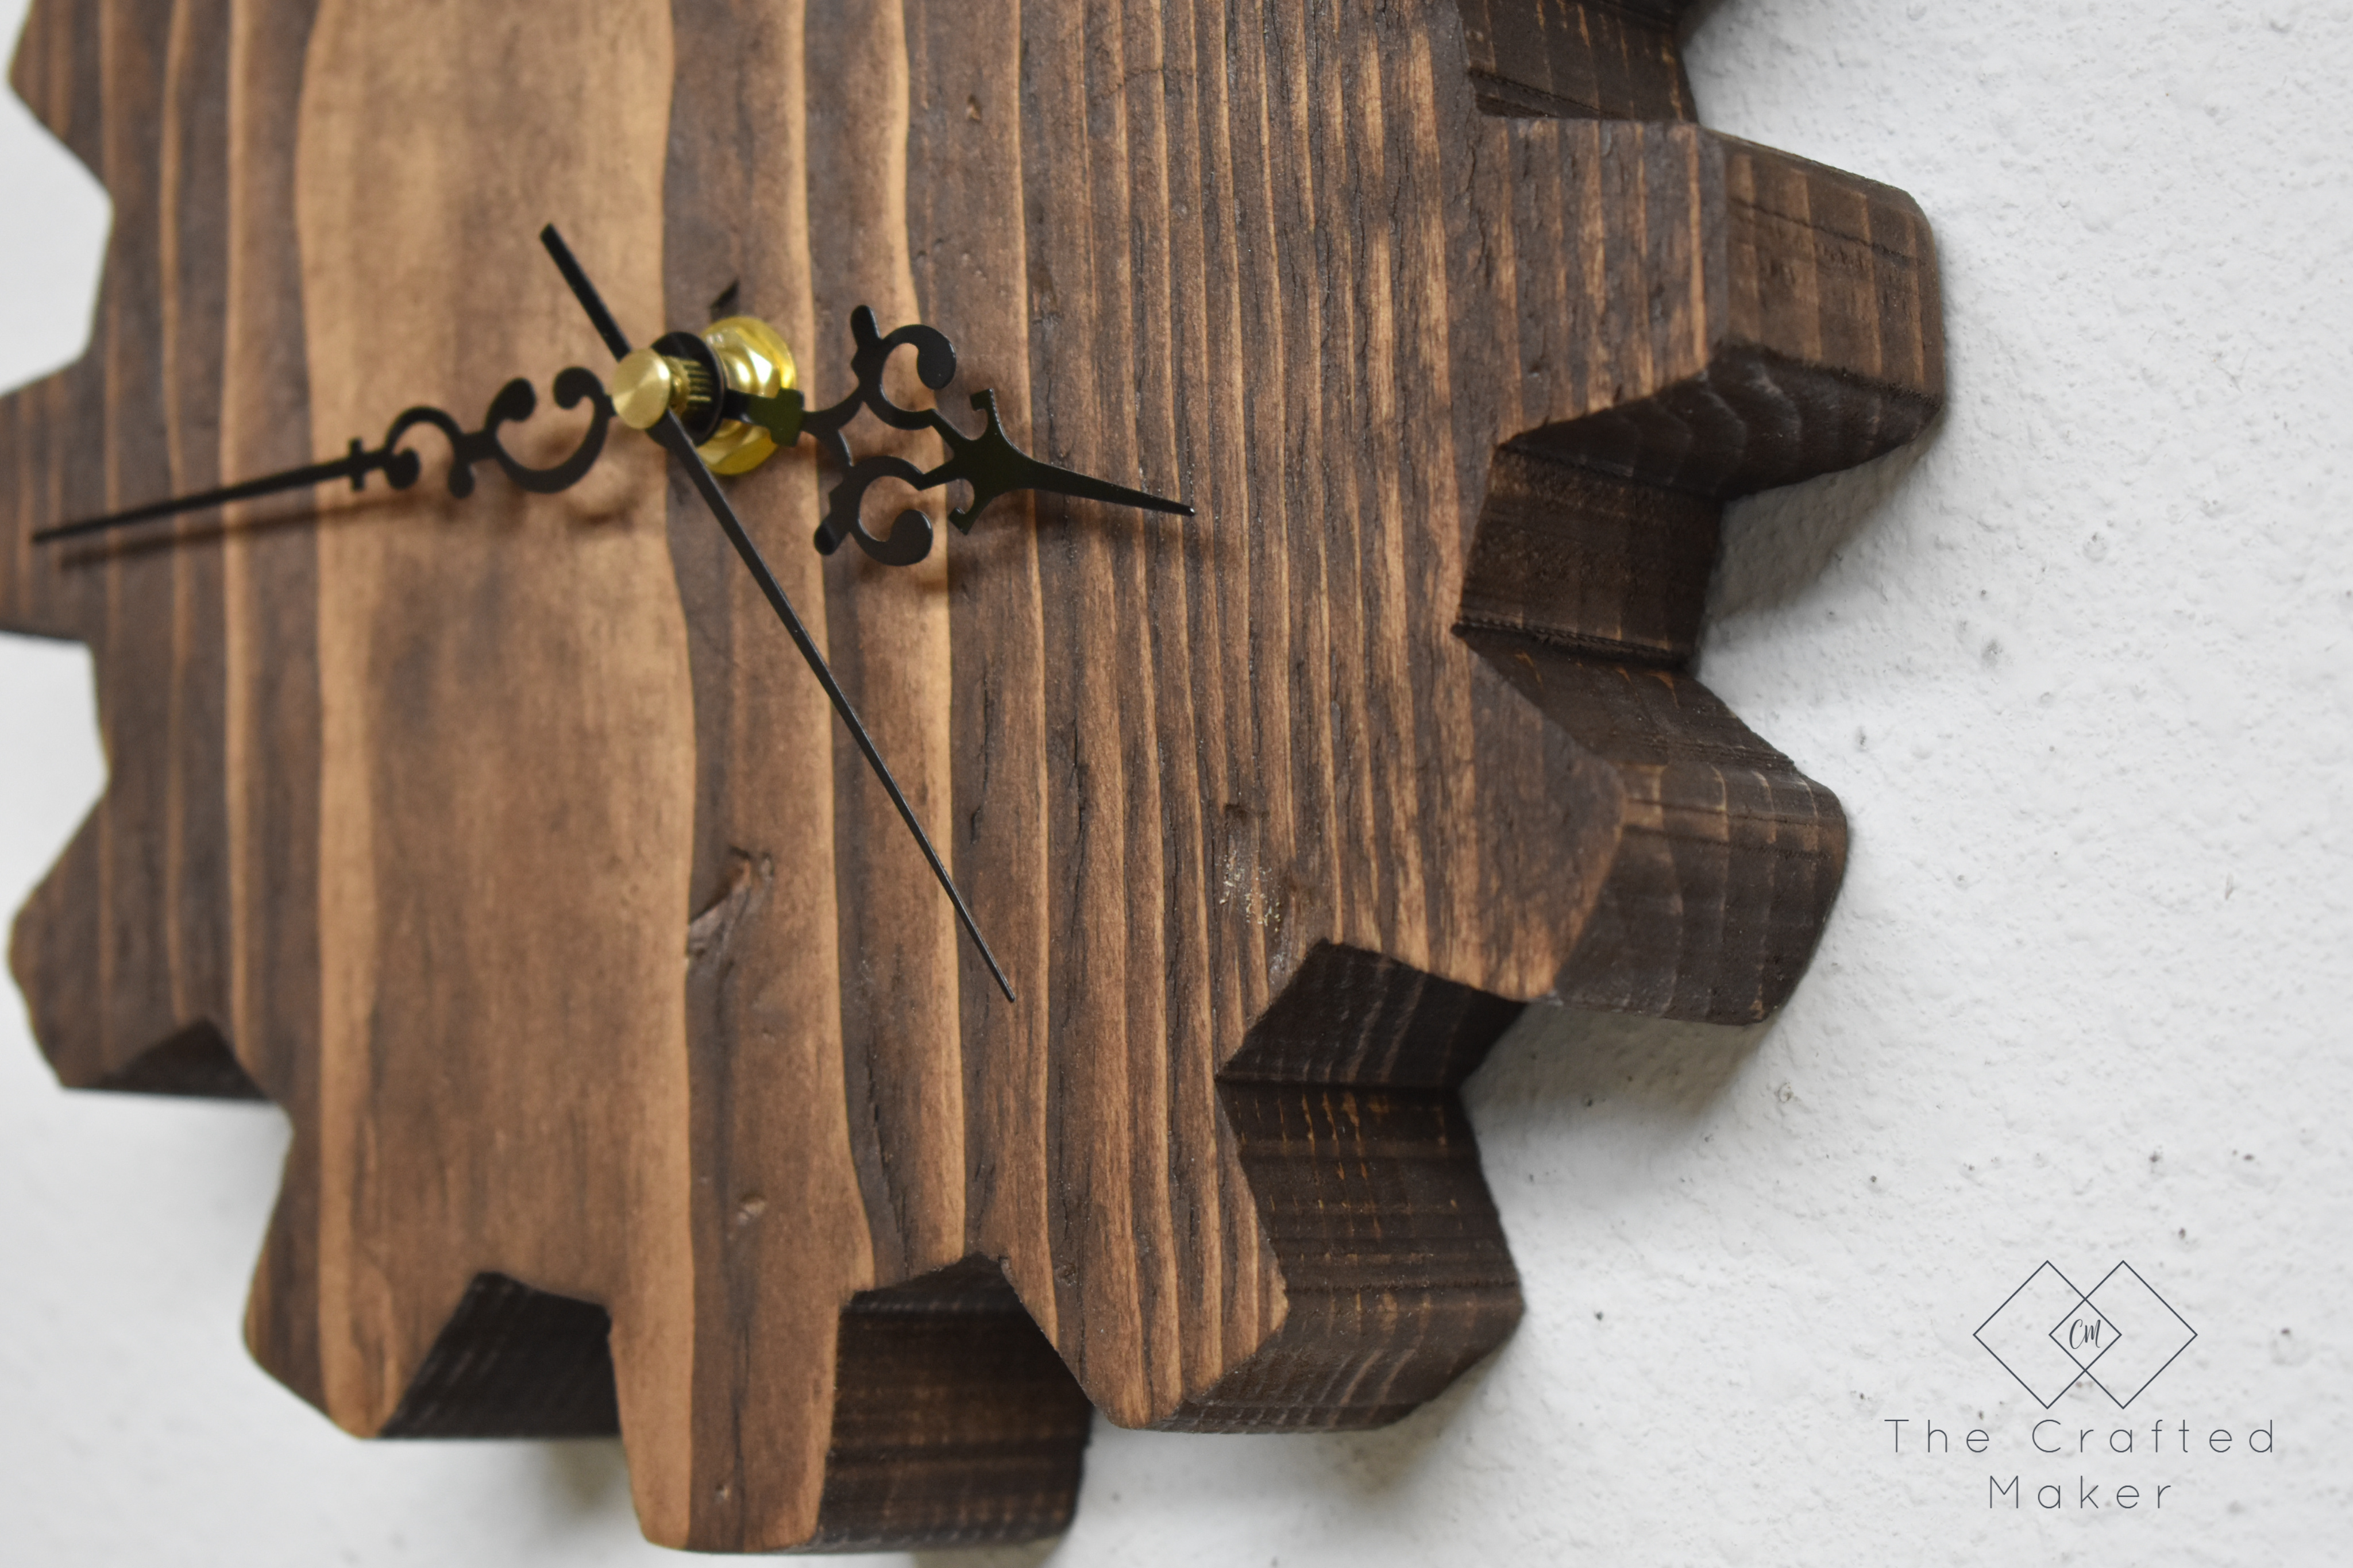 Give your workshop some character with this wooden gear wall clock. This is an easy DIY project that is completely customizable in size and design!